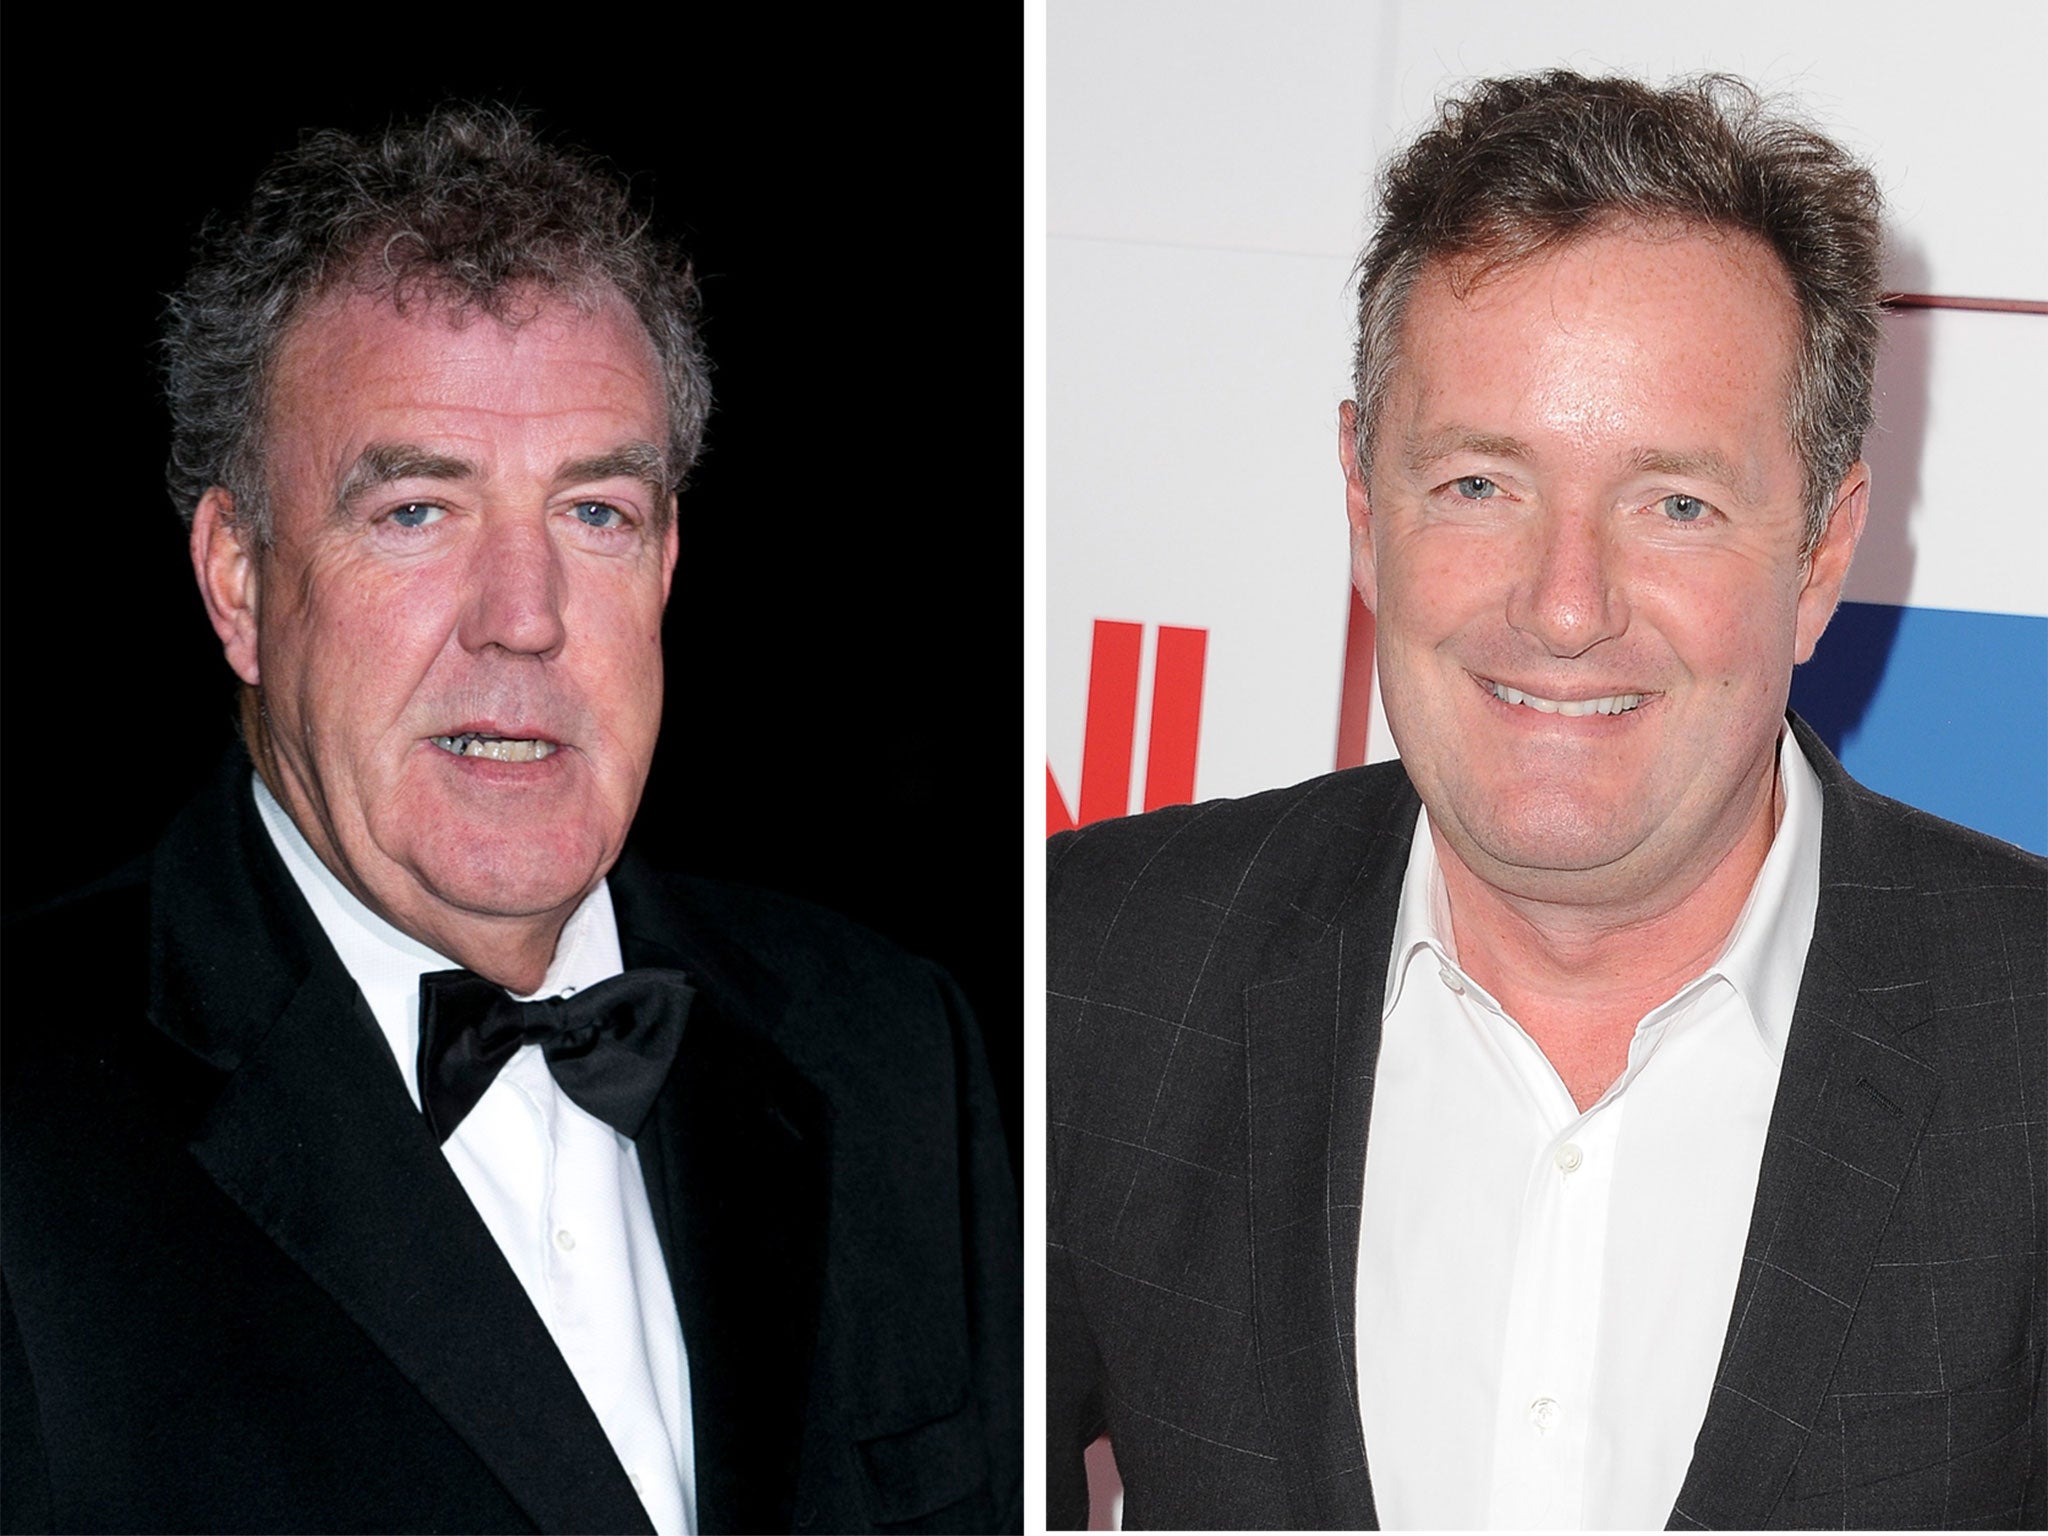 Piers Morgan has penned an open letter to ex-Top Gear presenter Jeremy Clarkson.